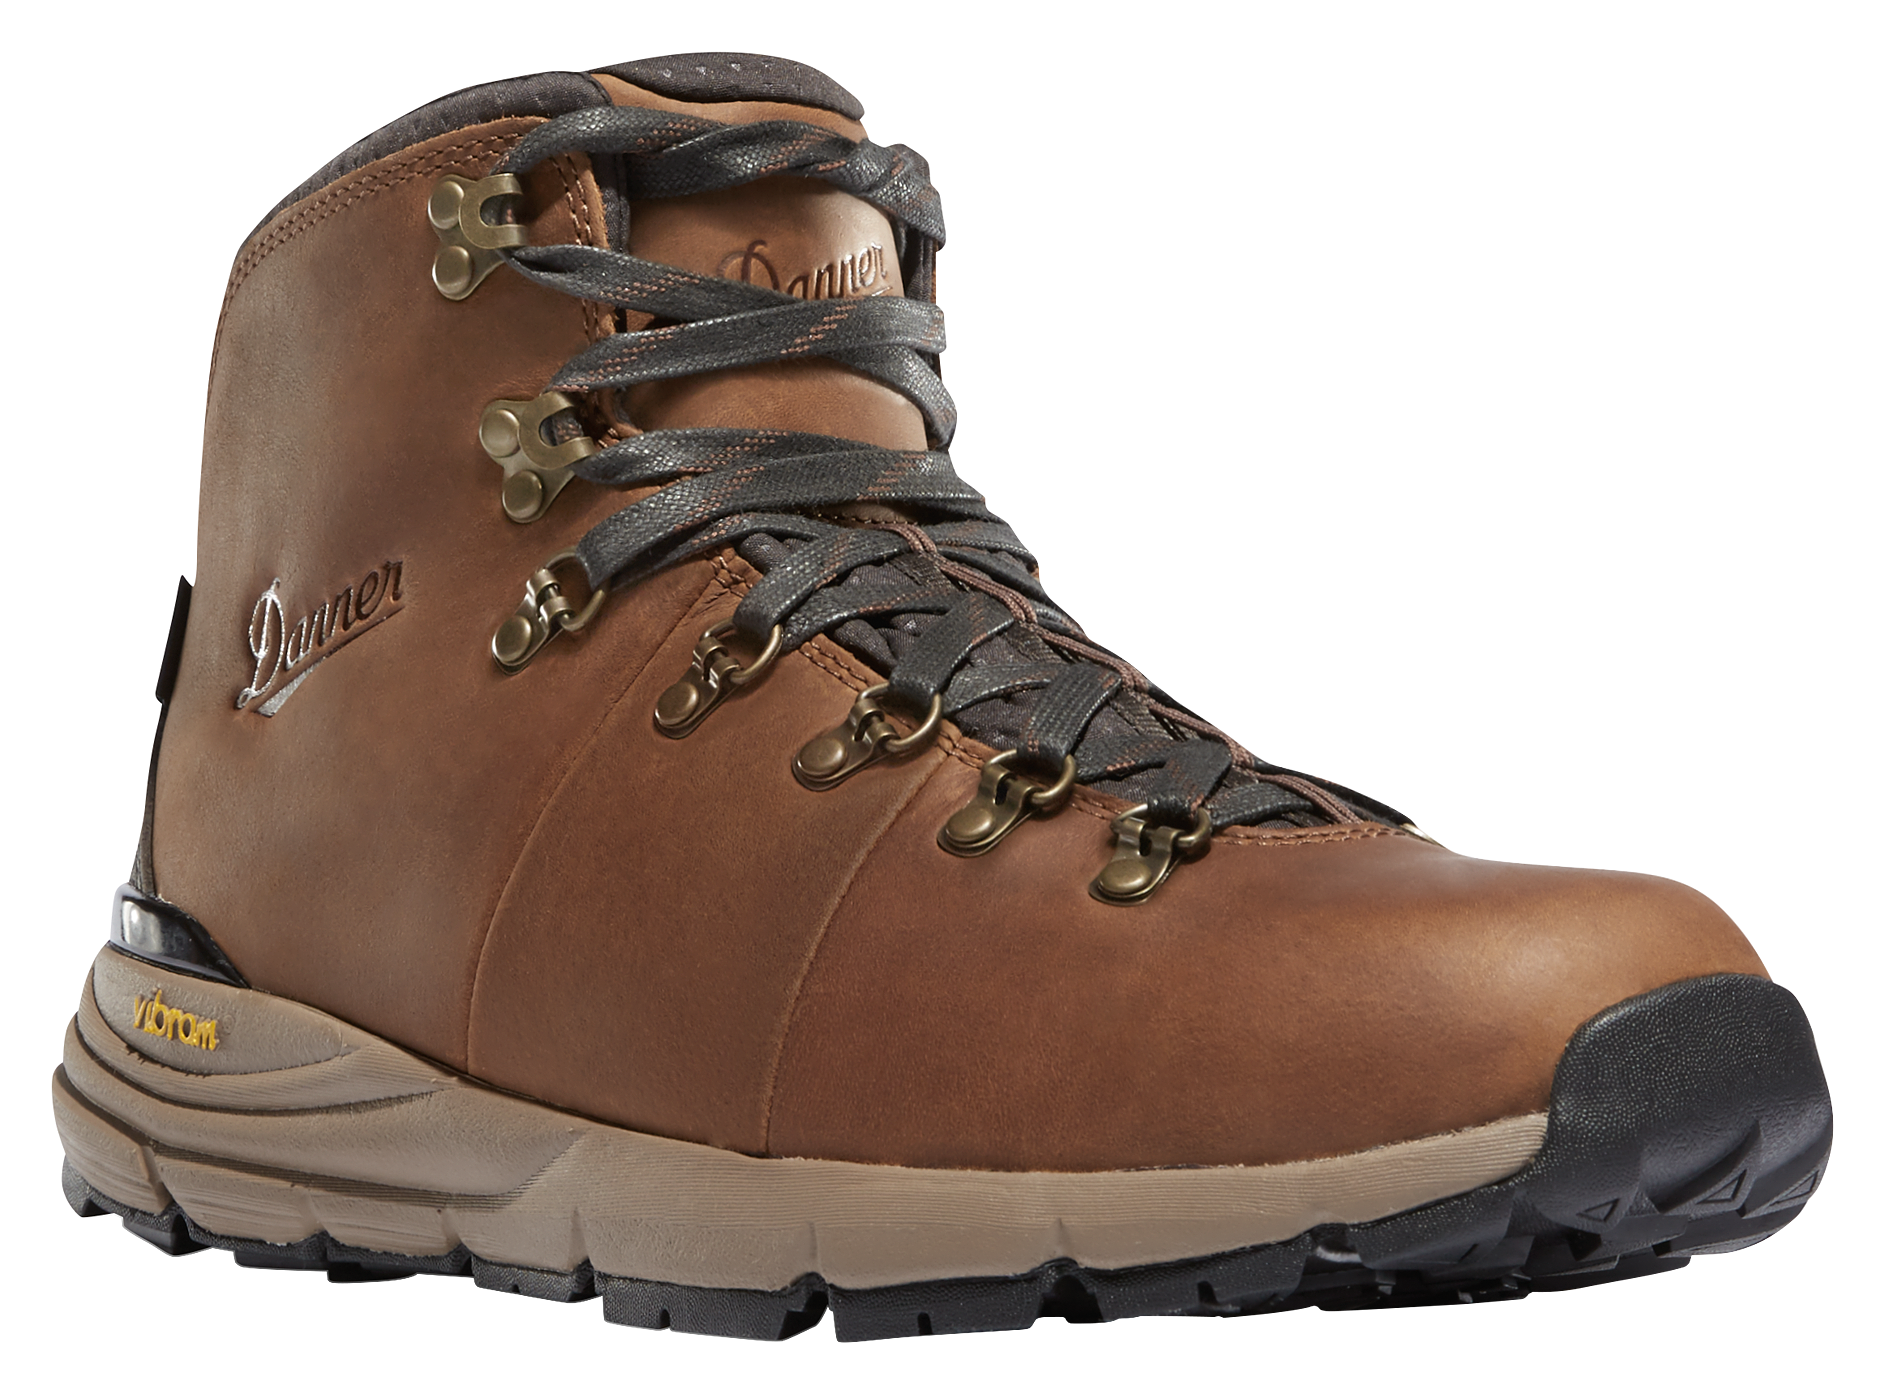 Danner Mountain 600 Waterproof Hiking Boots for Men - Rich Brown - 12M